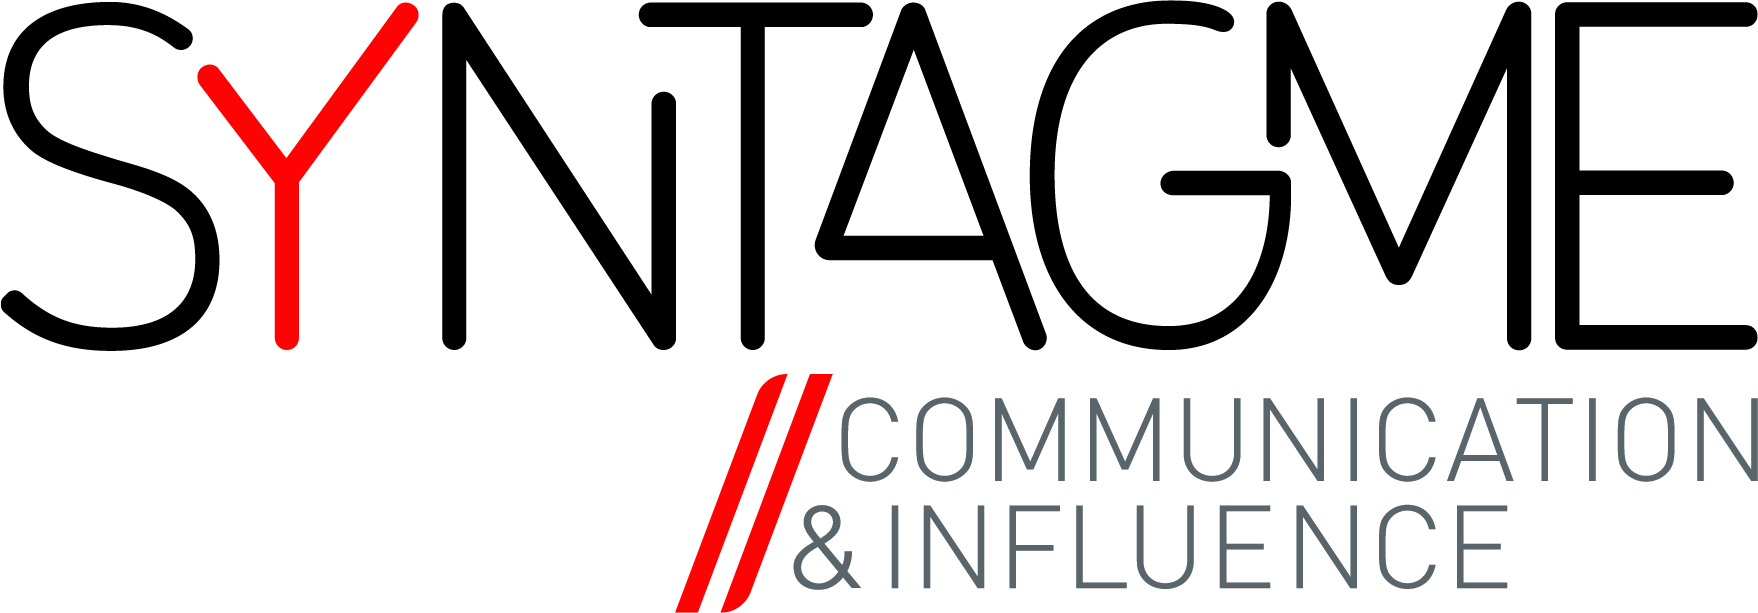 icon-syntagme-agence-communication-influence